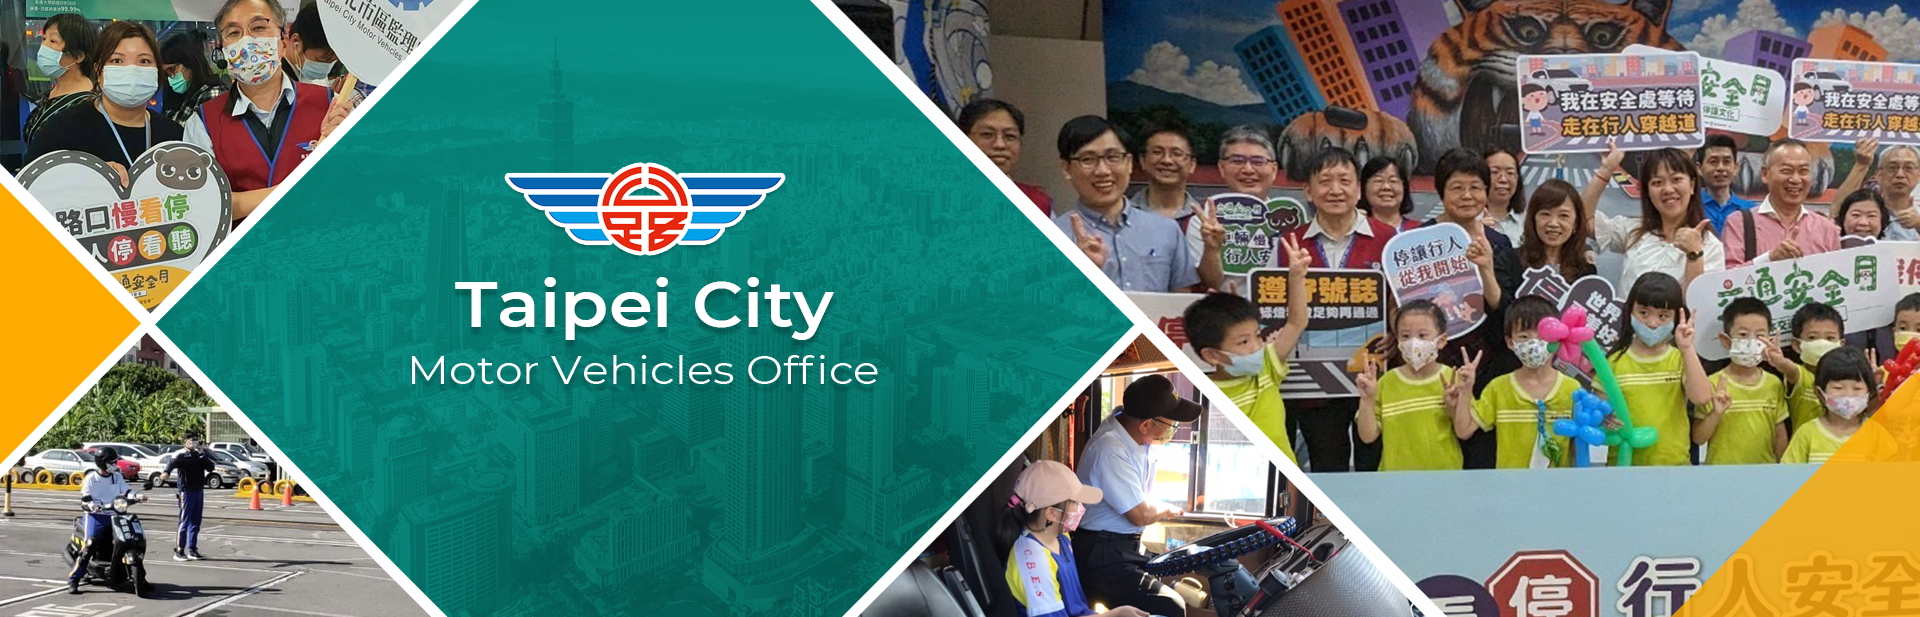 Welcome to Taipei City Motor Vehicles Office